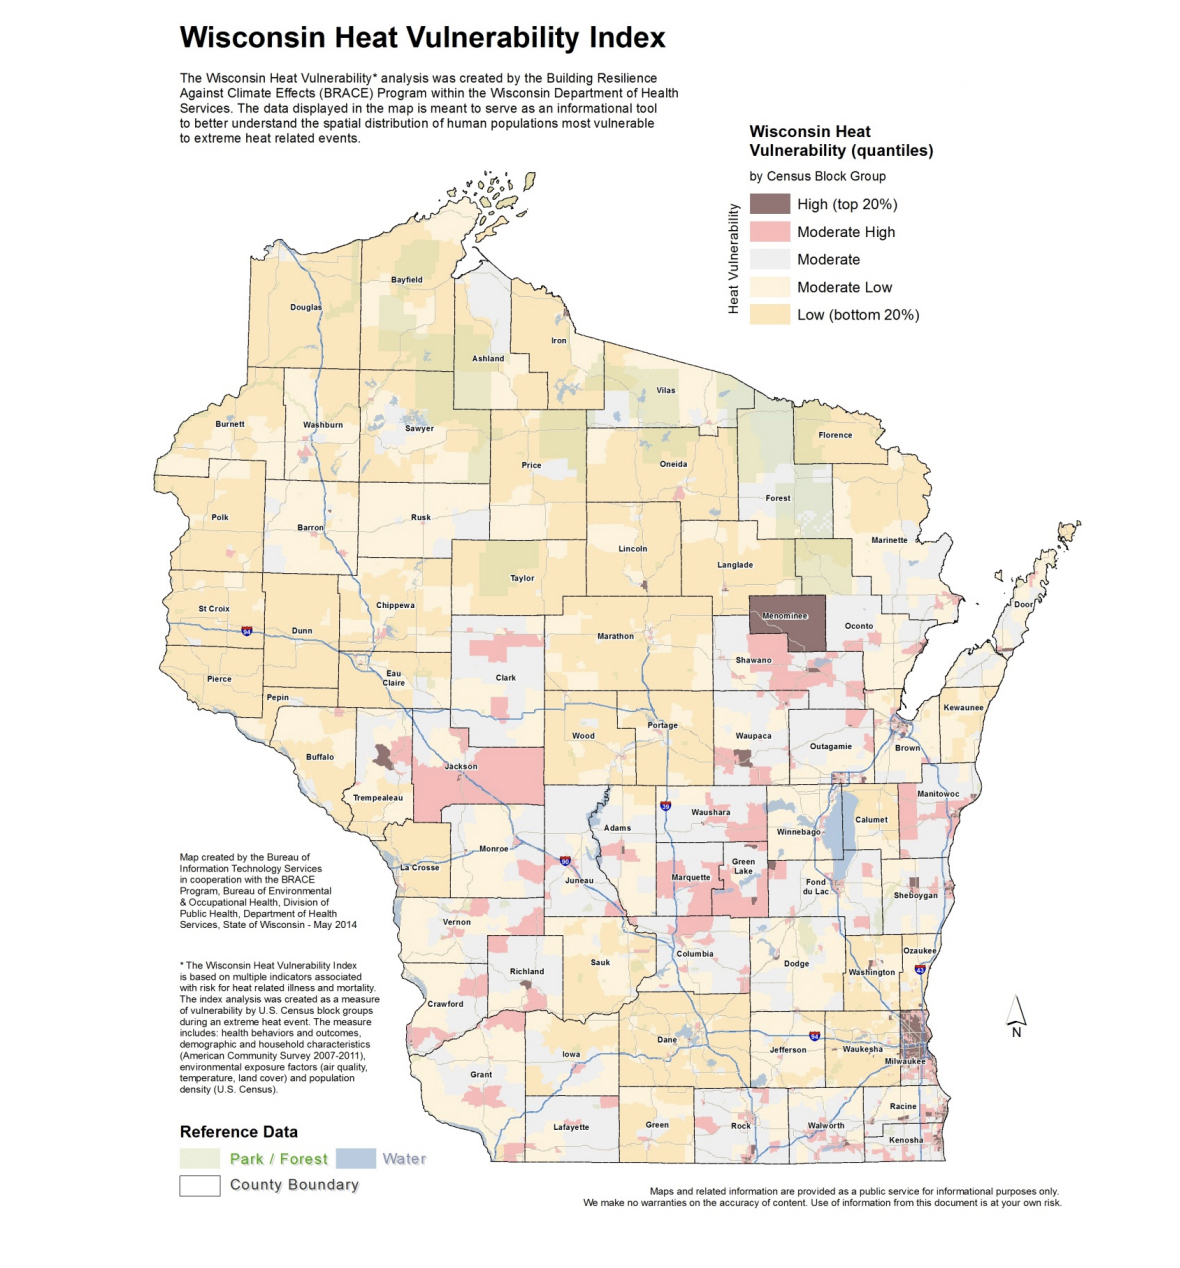 A map titled "Wisconsin Heat Vulnerability Index" shows color-coded census blocks as being "High," "Moderate High," "Moderate," "Moderate Low" and "Low" in terms of their human populations being vulnerable to extreme heat-related events.